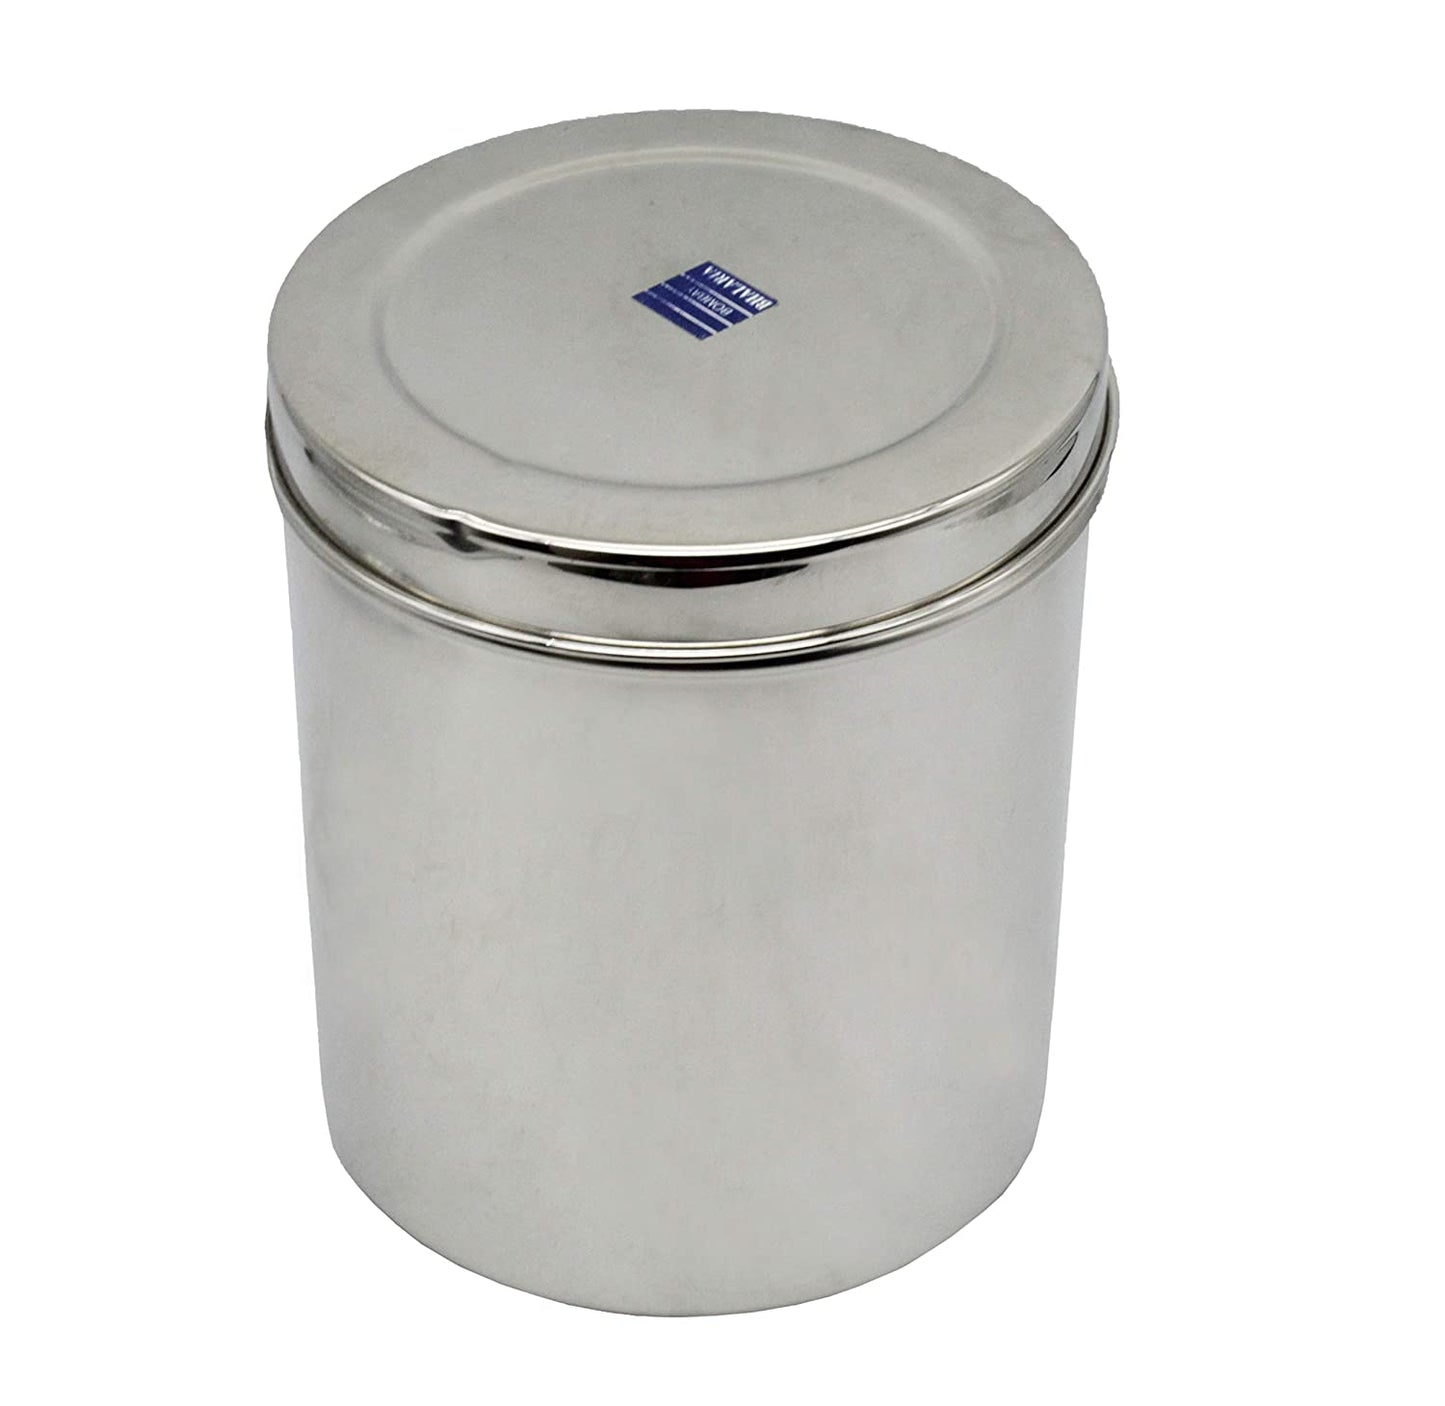 Stainless Steel Container | Canister | Deep Dabba Set of 5 Pcs (10.5cm,12.5cm,13.5cm,14.5cm,15.5cm)